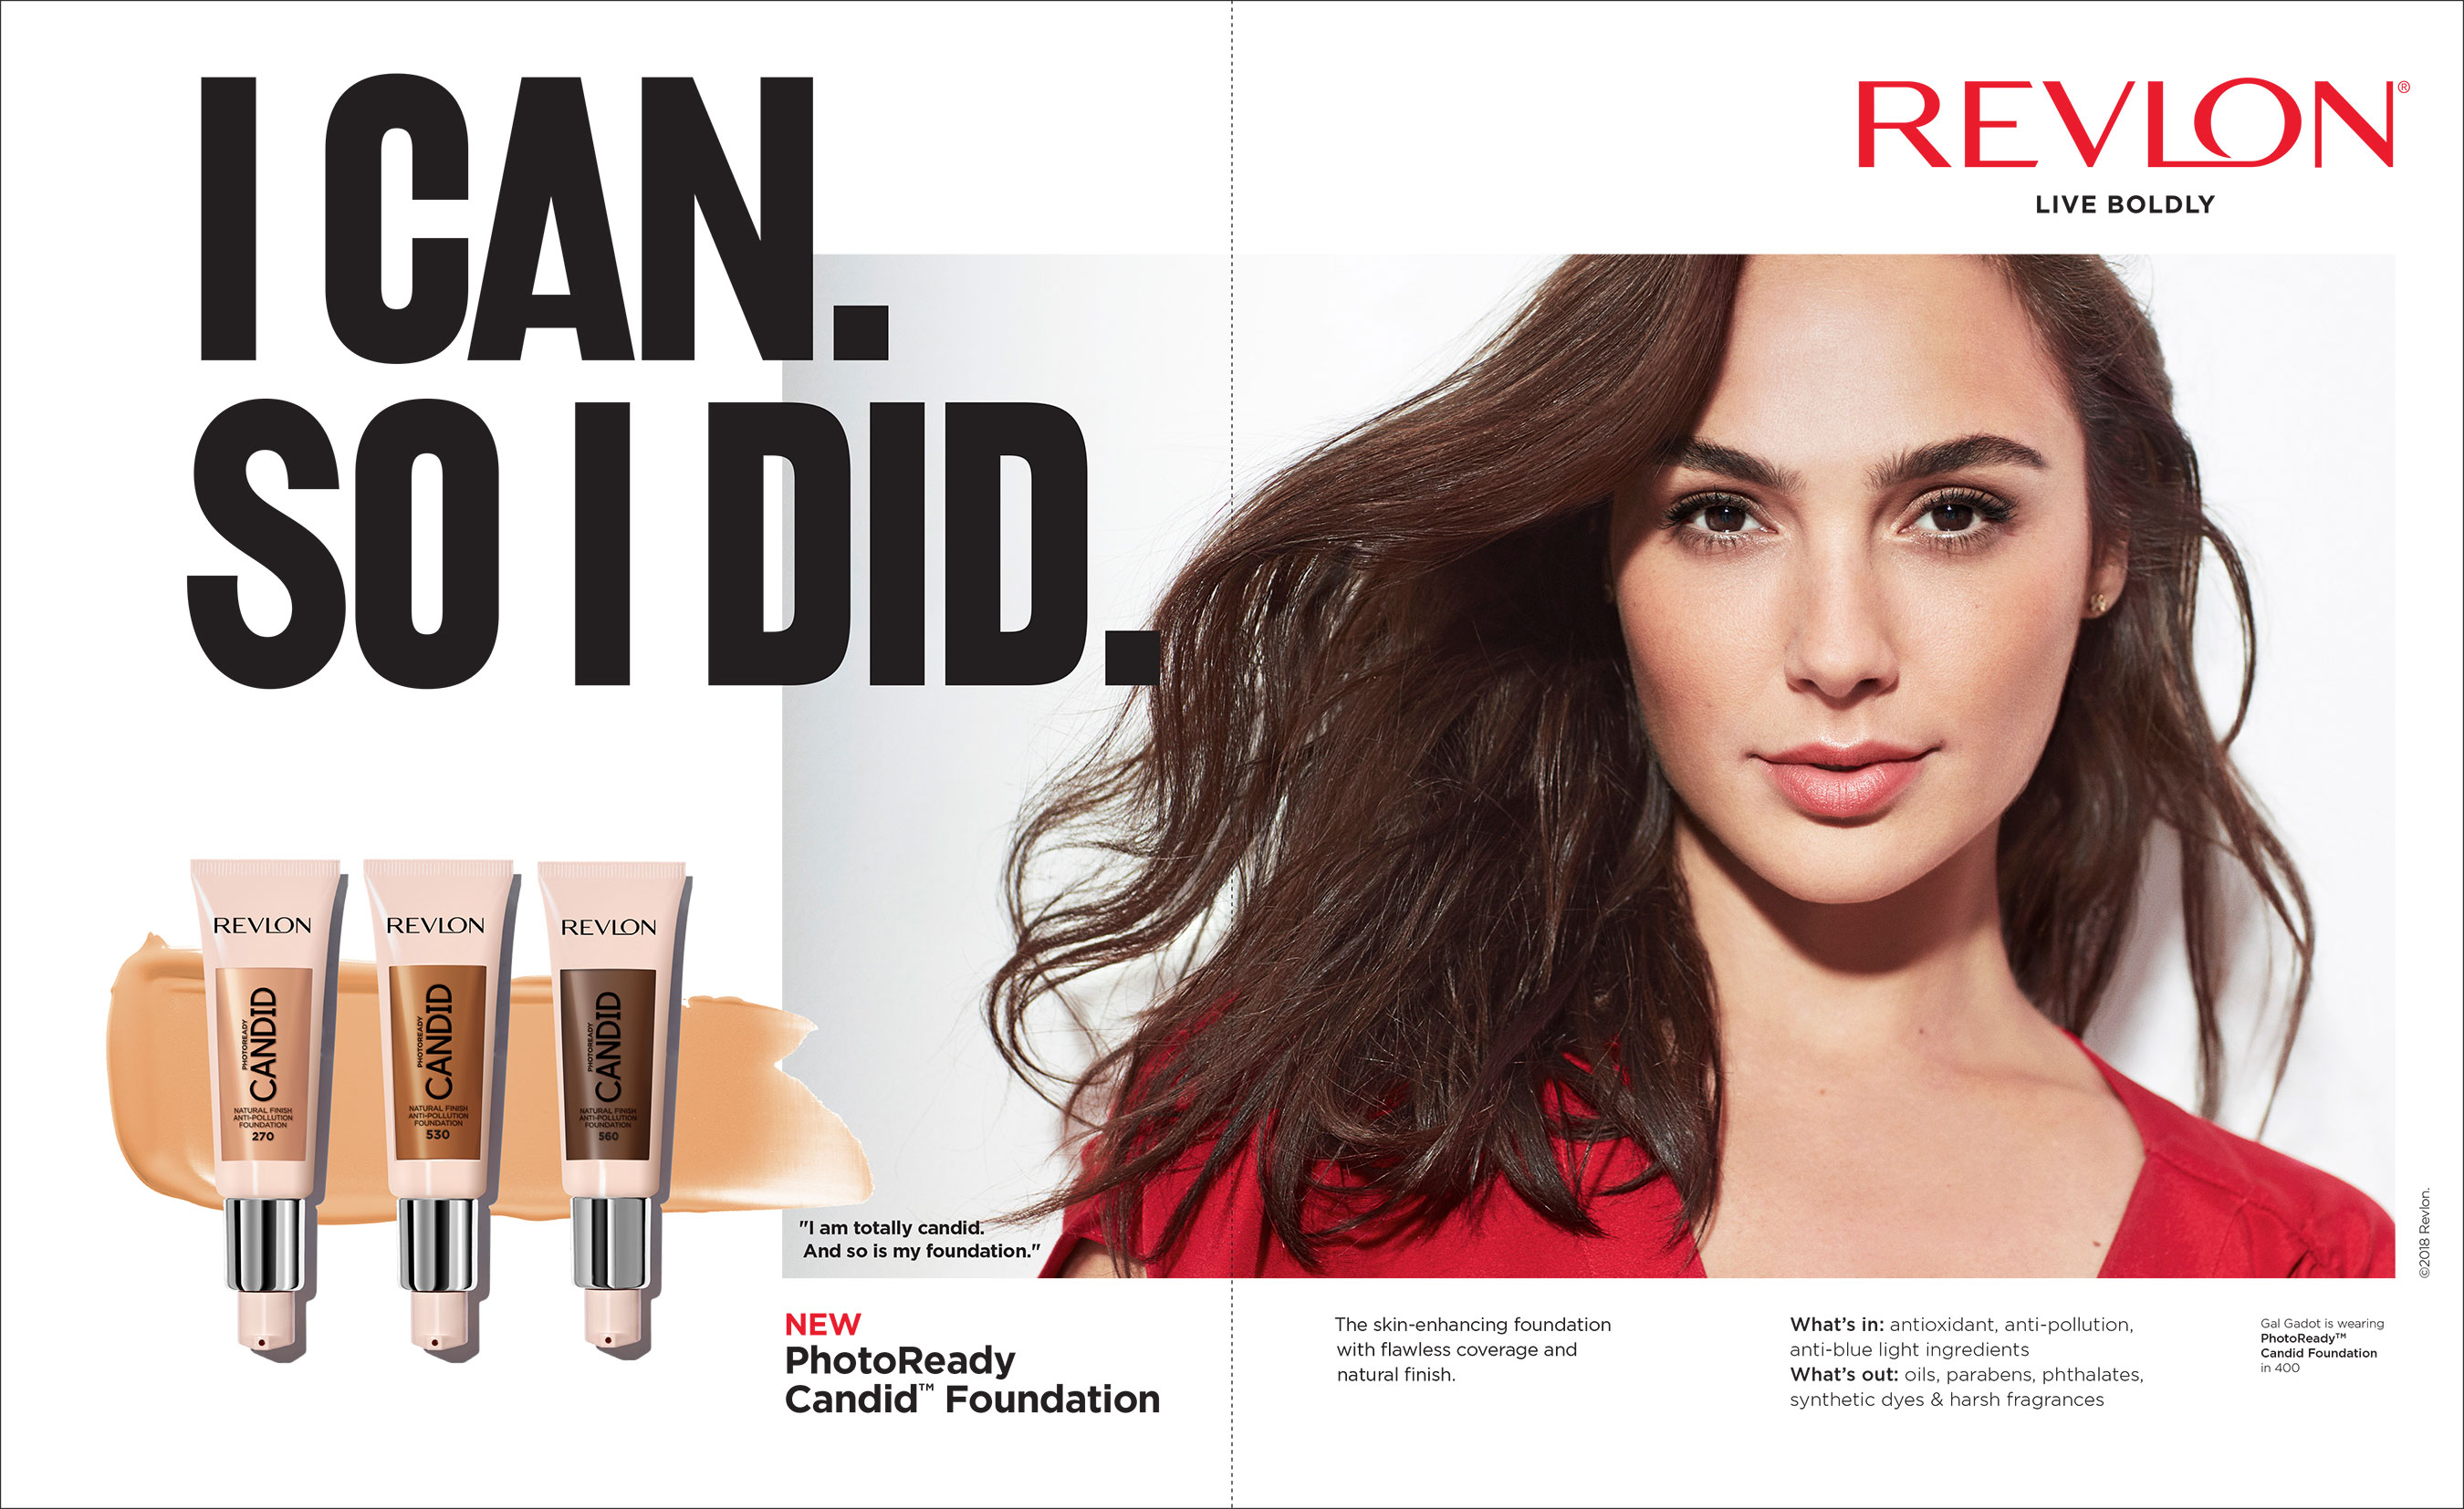 Revlon Unveils Its New “I Can. So I Did.” Campaign with Brand Ambassadors